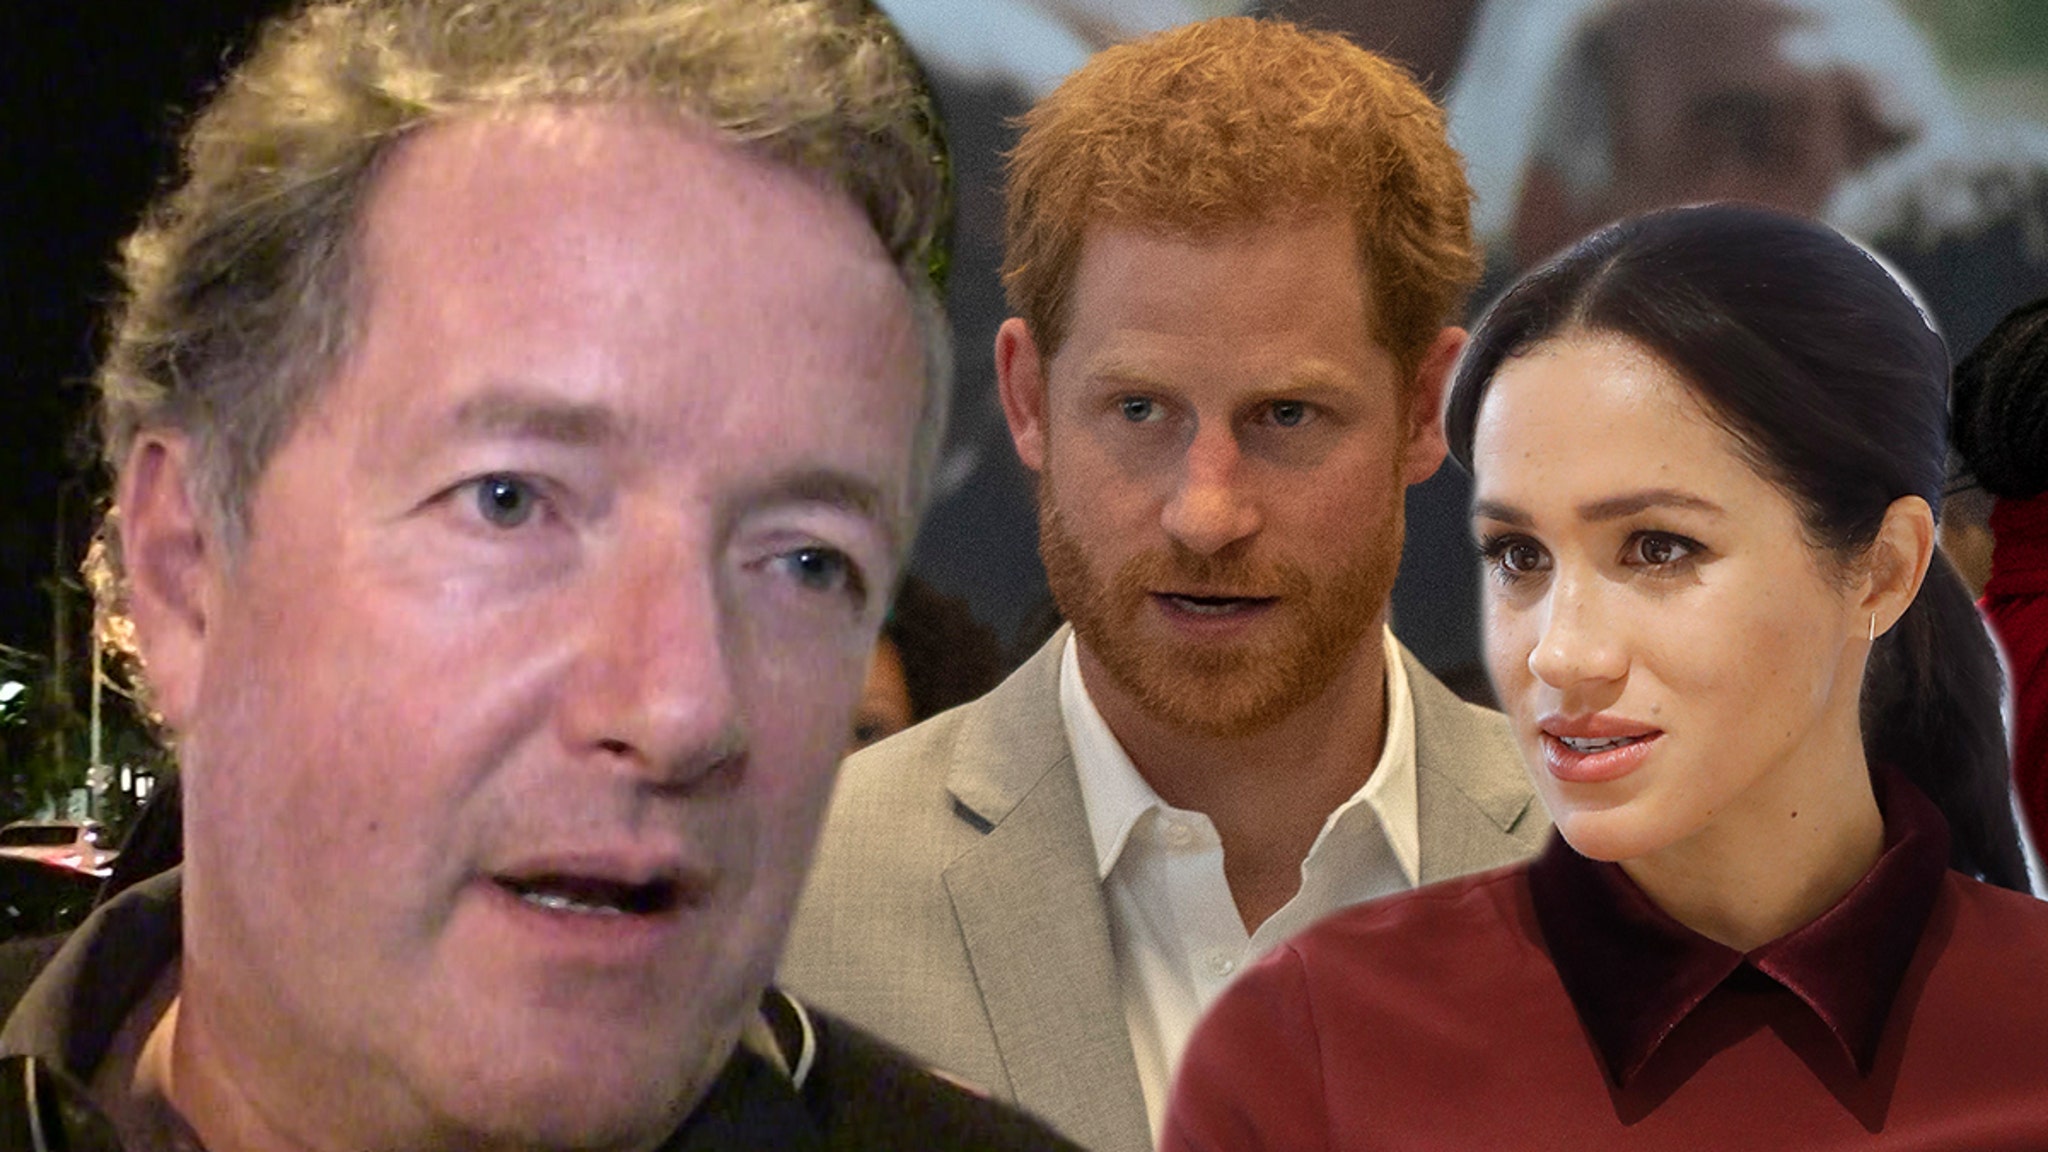 Piers Morgan Dragged Over Meghan, Harry in ‘Good Morning Britain’